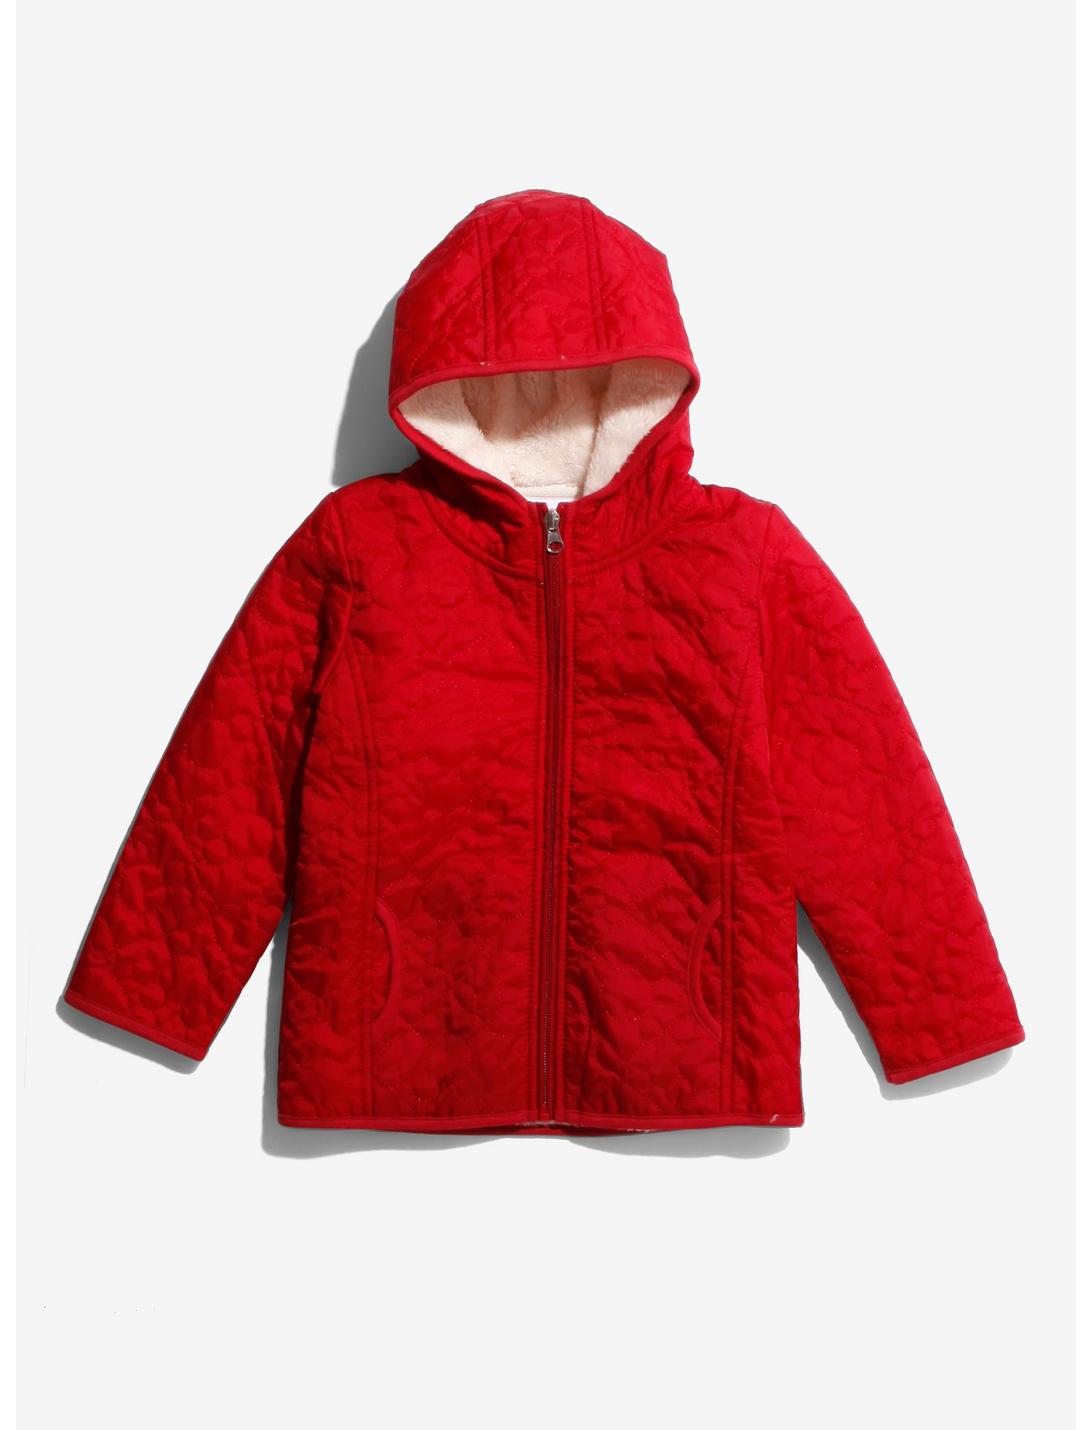 Disney Minnie Mouse Toddler Puffer Jacket, RED, hi-res